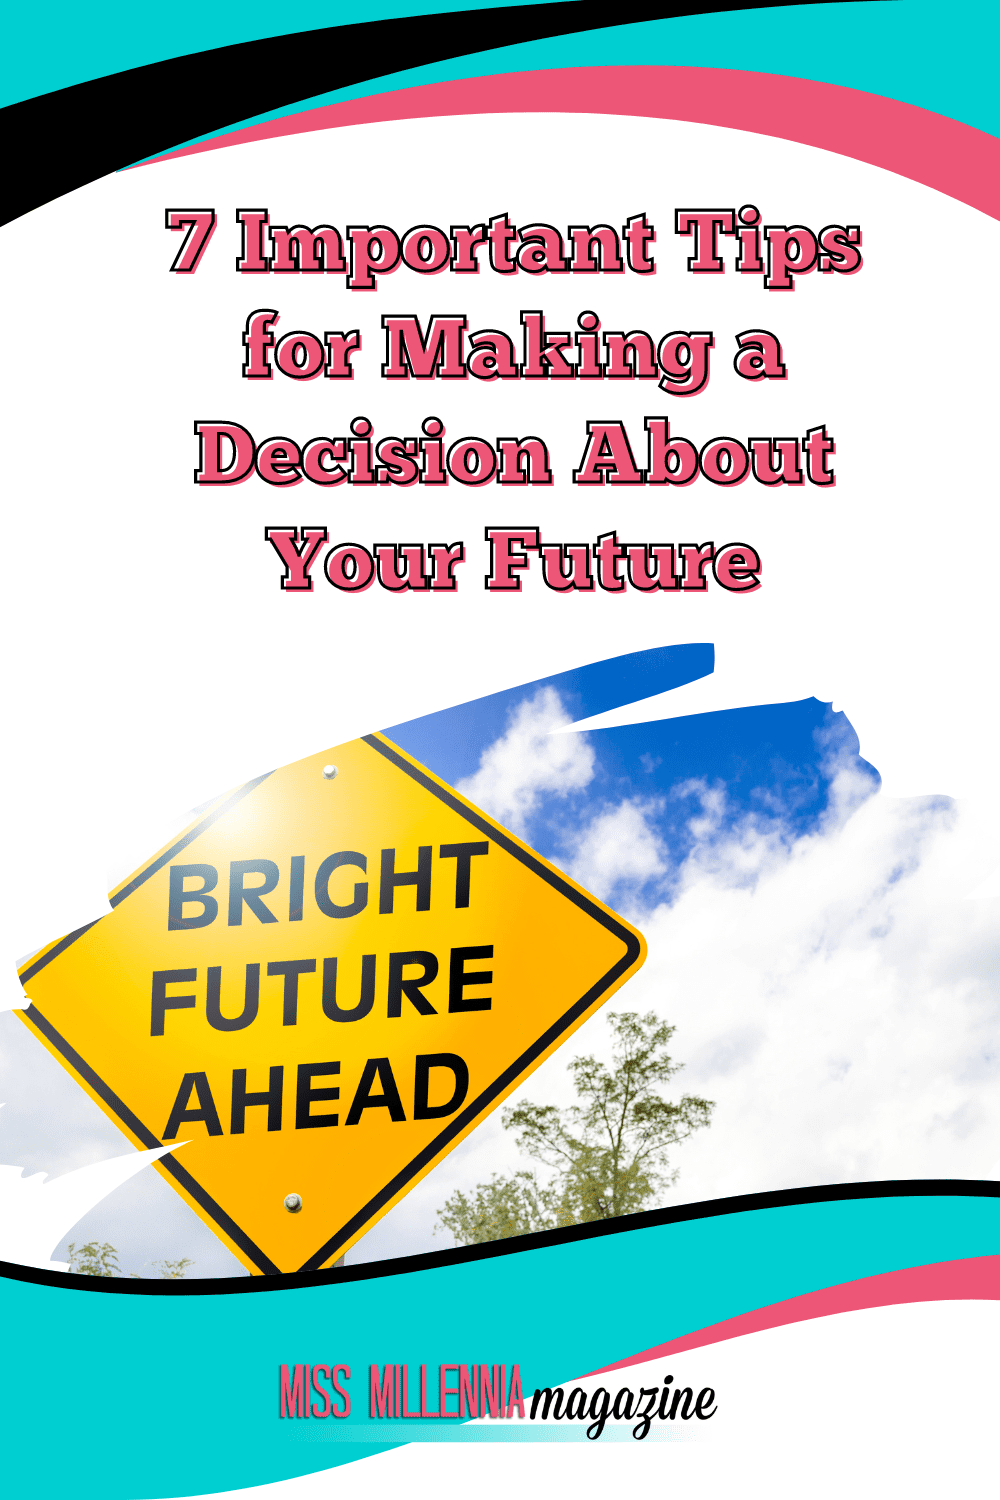 7 Important Tips for Making a Decision About Your Future